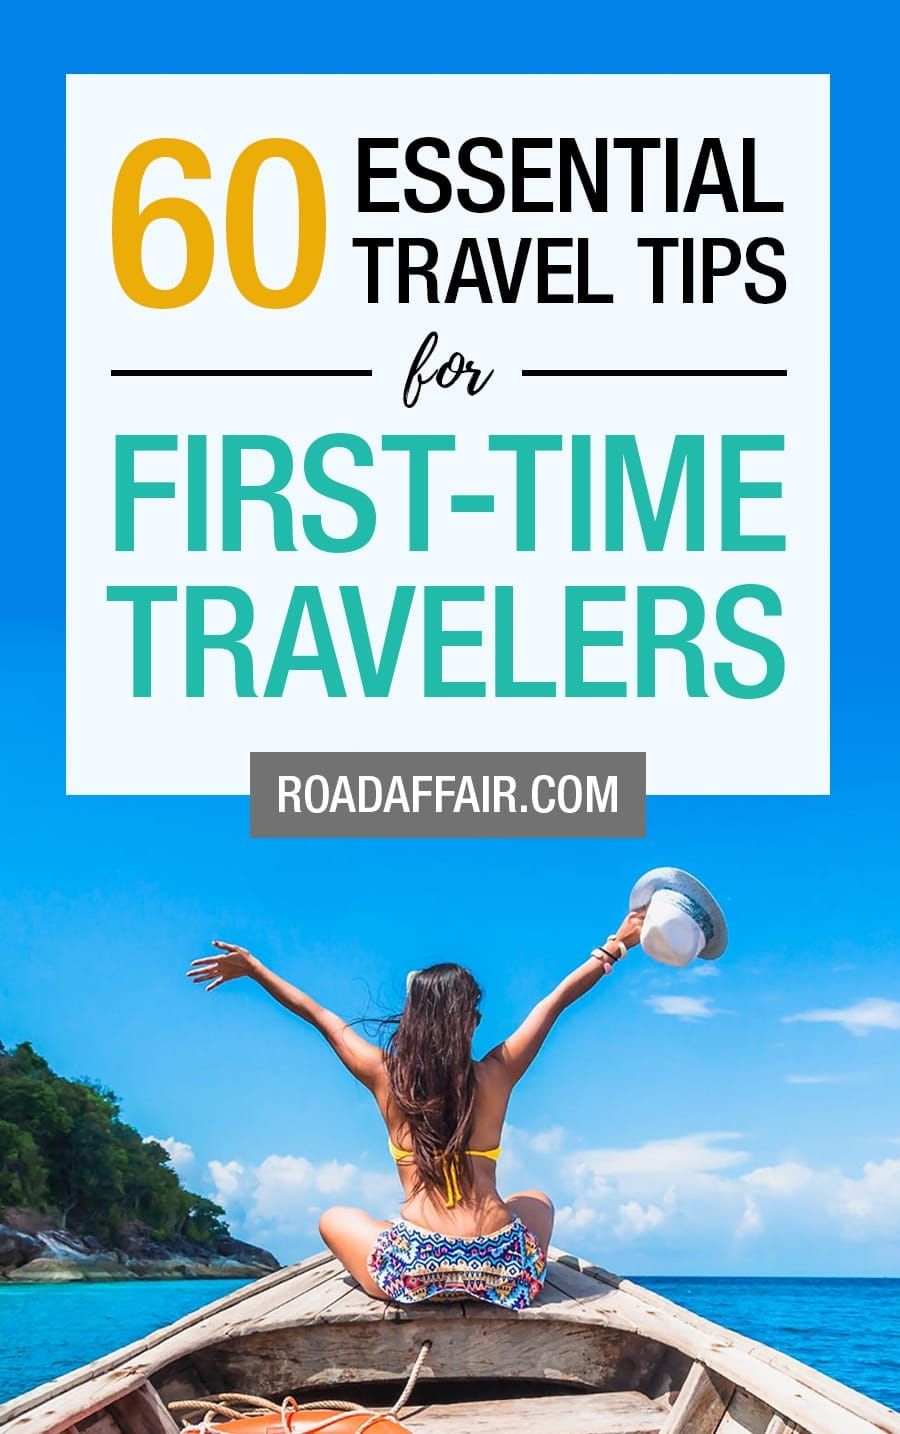 Top tips for a first-time traveller.